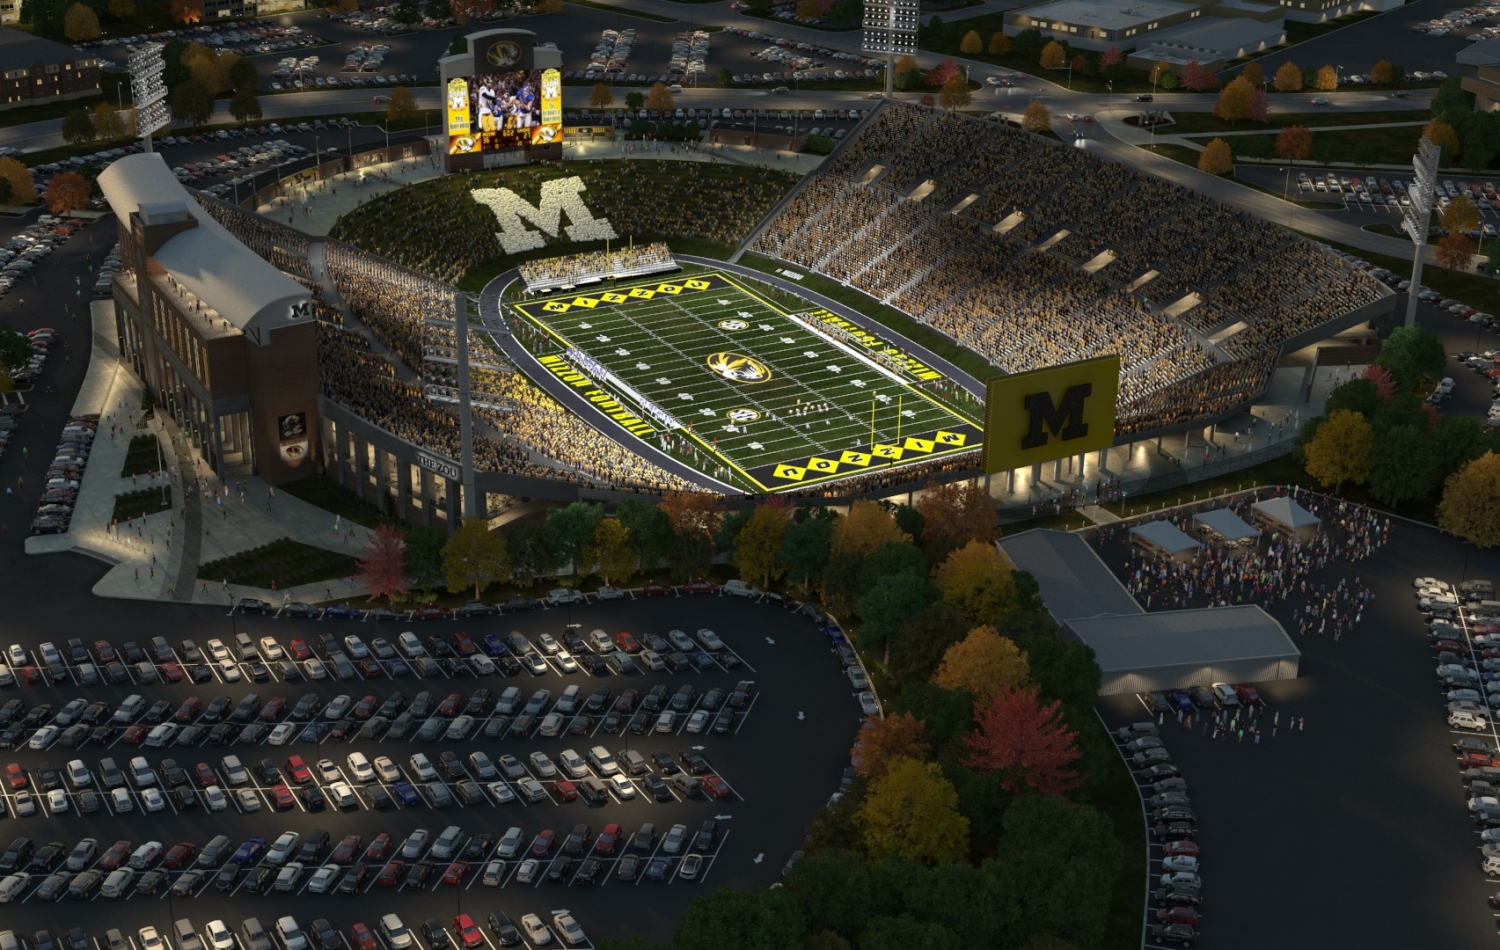 One of a set of 3D stadium renderings that show the crowds of attendees entering the stadium.